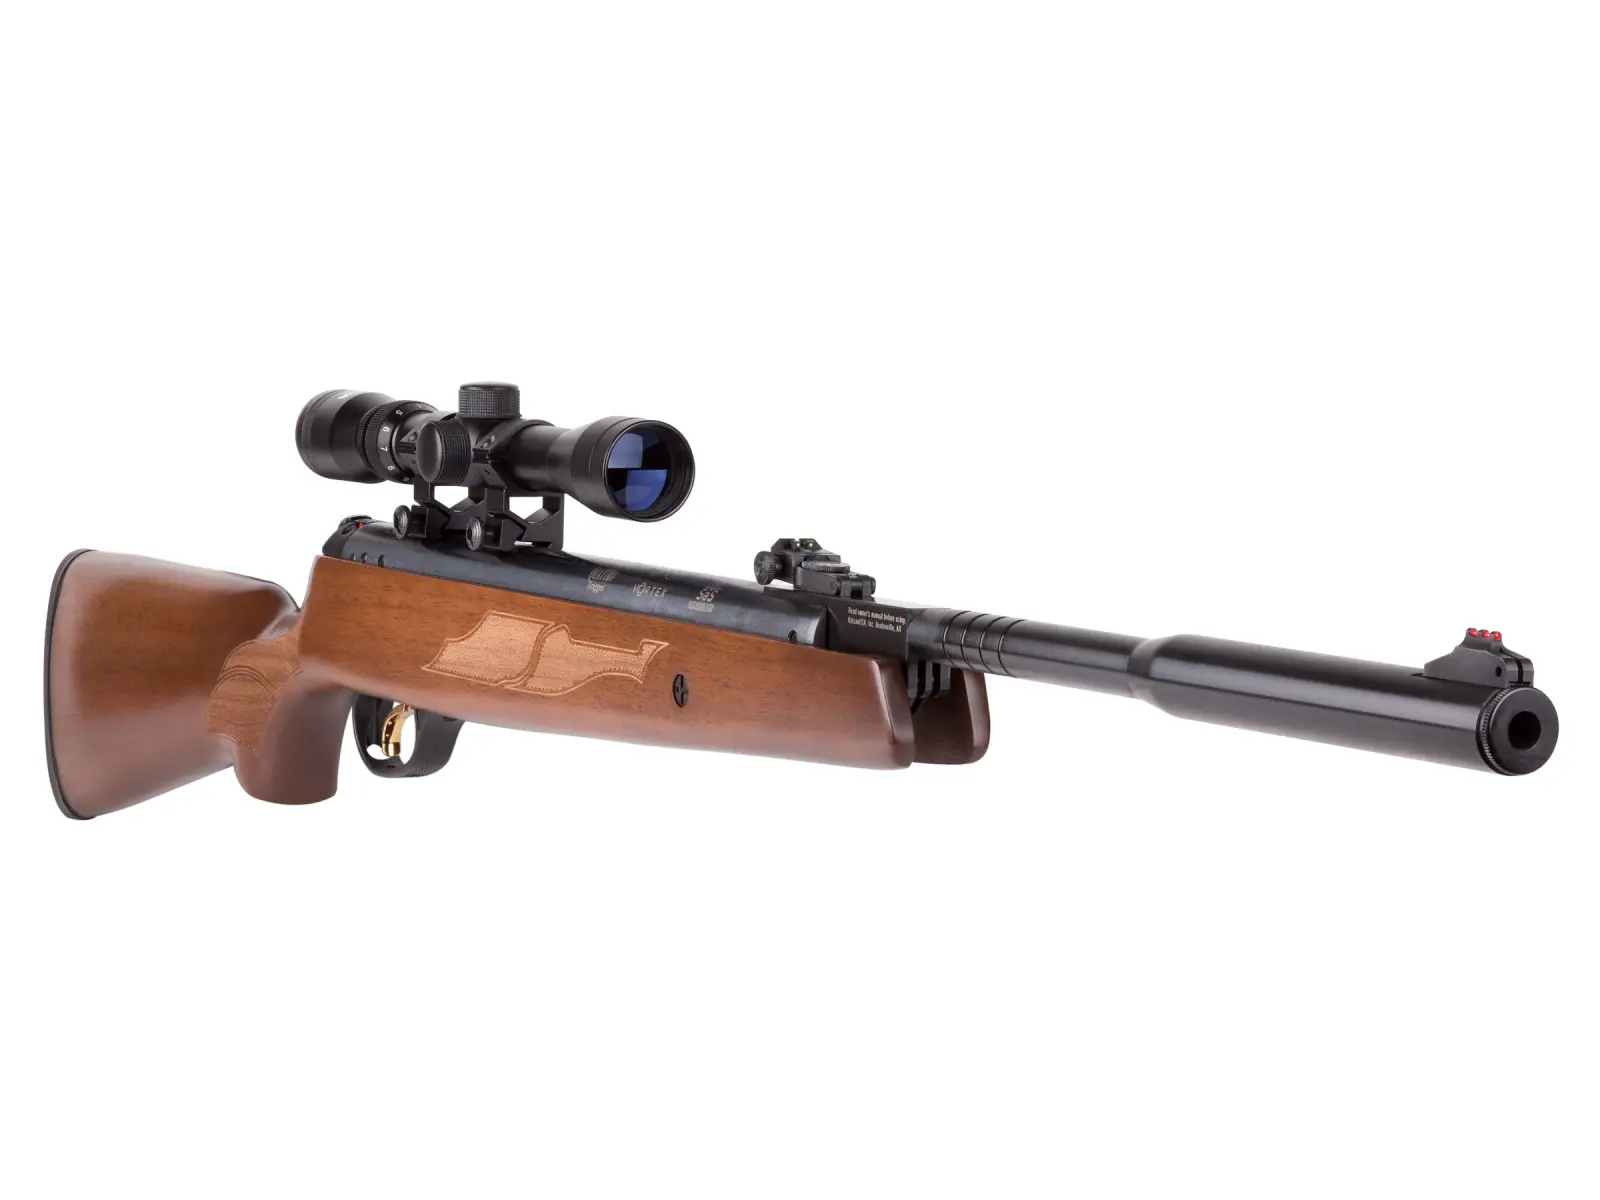 Best .22 Air Rifles - Top 11 fantastic guns for the money (Reviews and Buying Guide 2022)